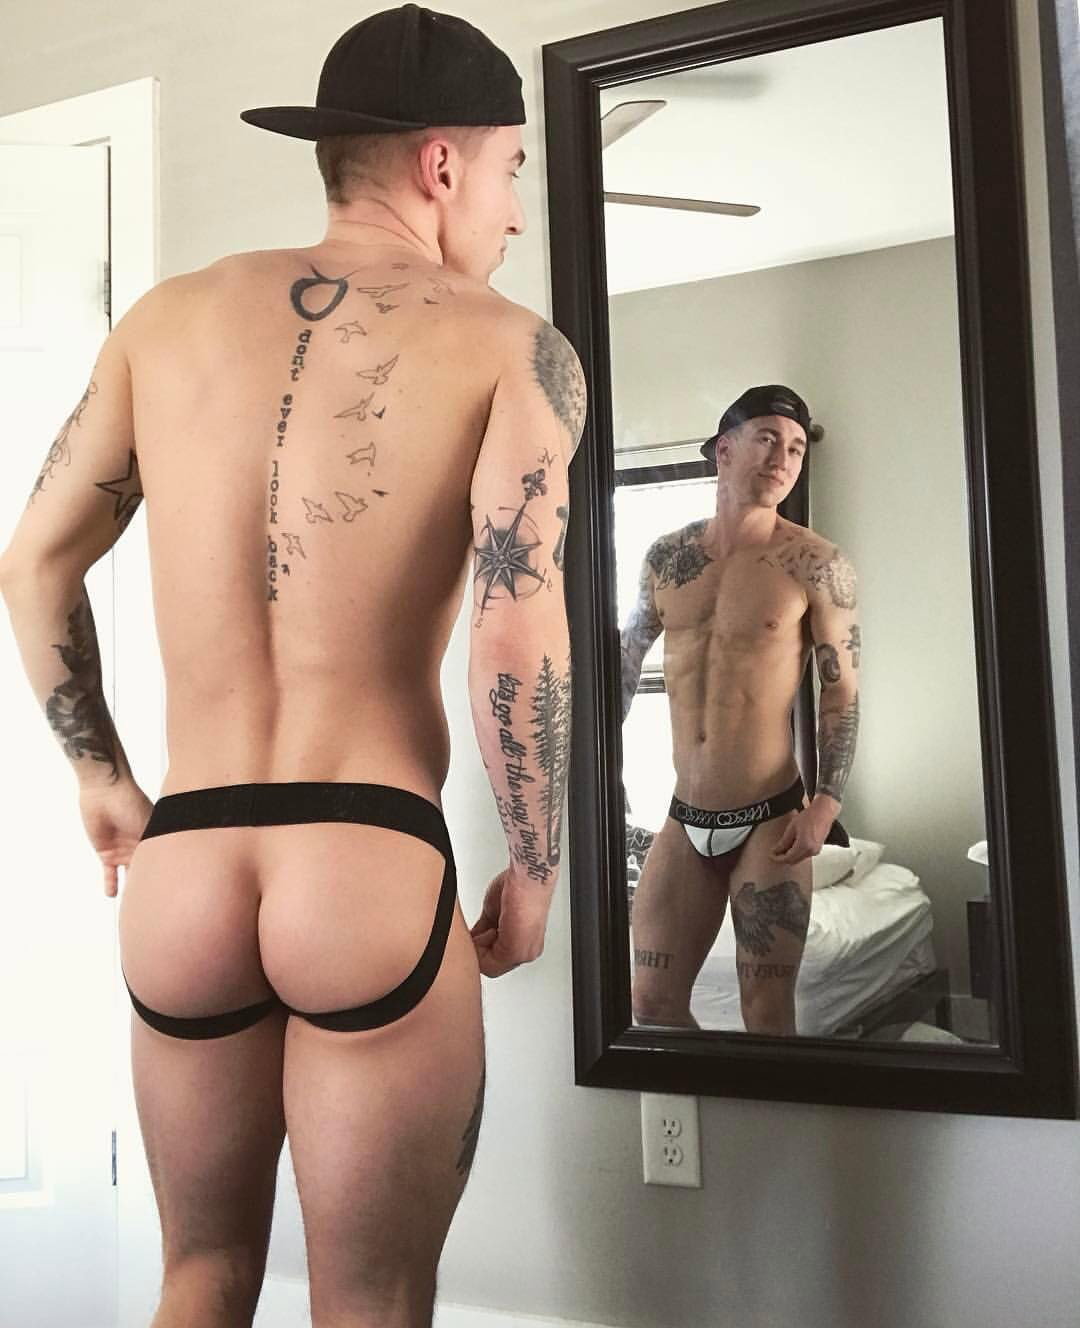 Photo by sydausperv with the username @sydausperv,  December 14, 2018 at 10:28 PM. The post is about the topic Guys in Jockstraps